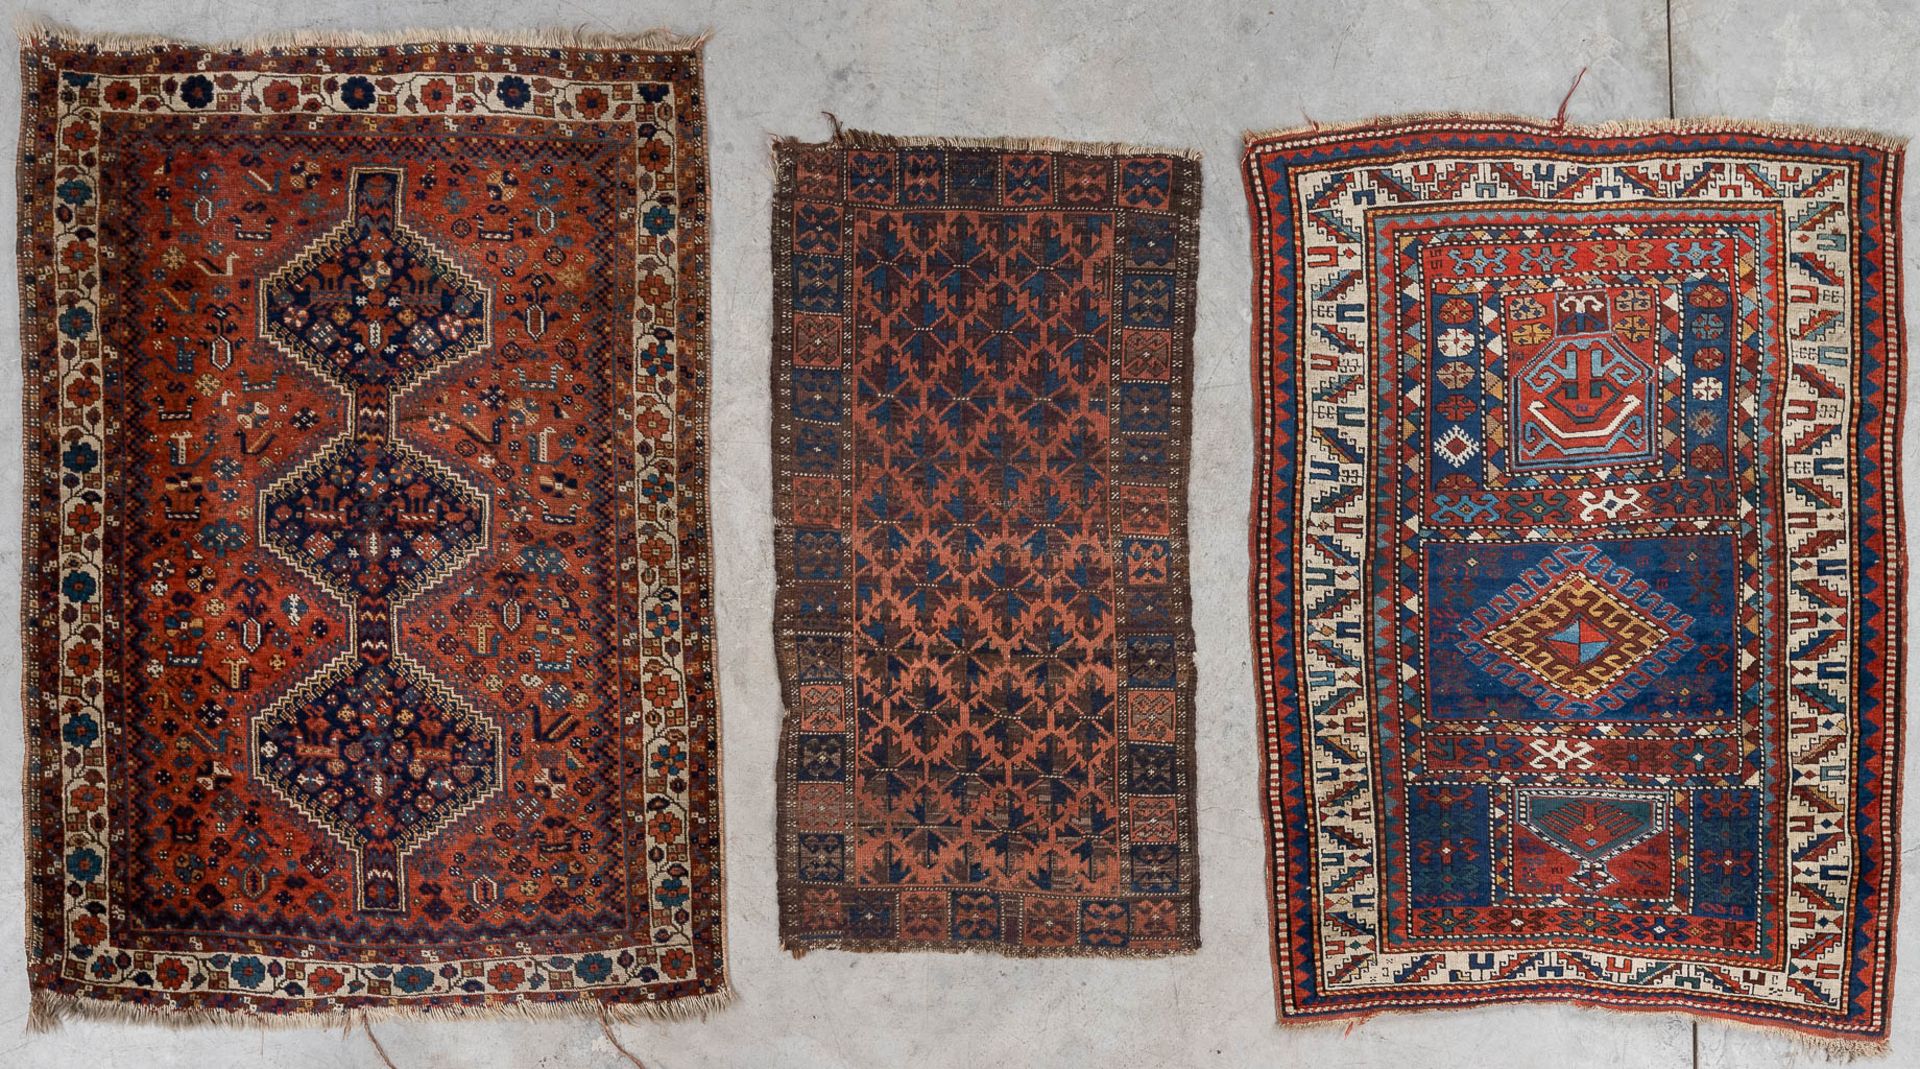 A collection of 3 Oriental hand-made carpets, probably Caucasian. (L: 157 x W: 116 cm)